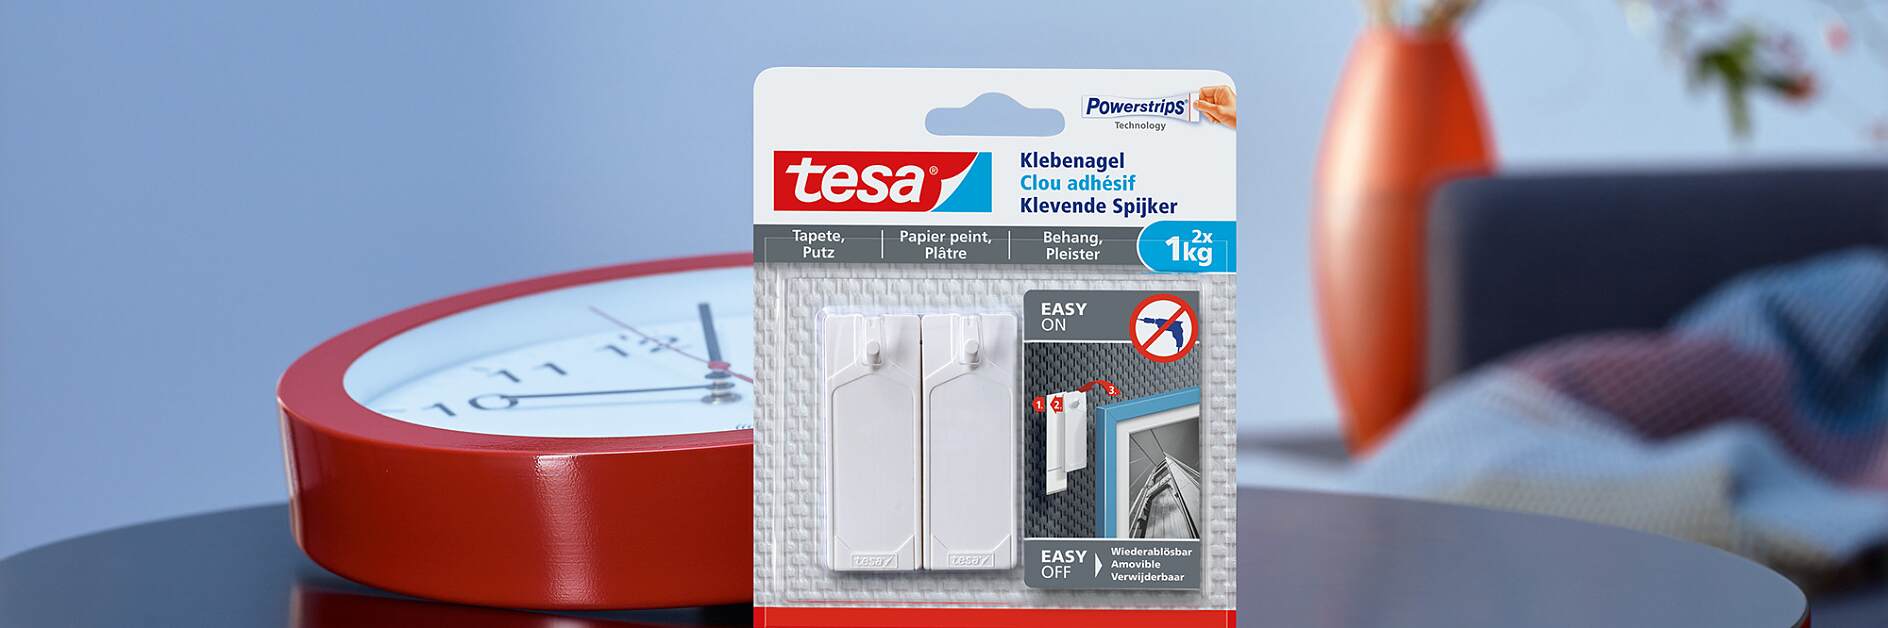 How to use a tesa® Adhesive Nail for Wallpaper & Plaster 1kg.